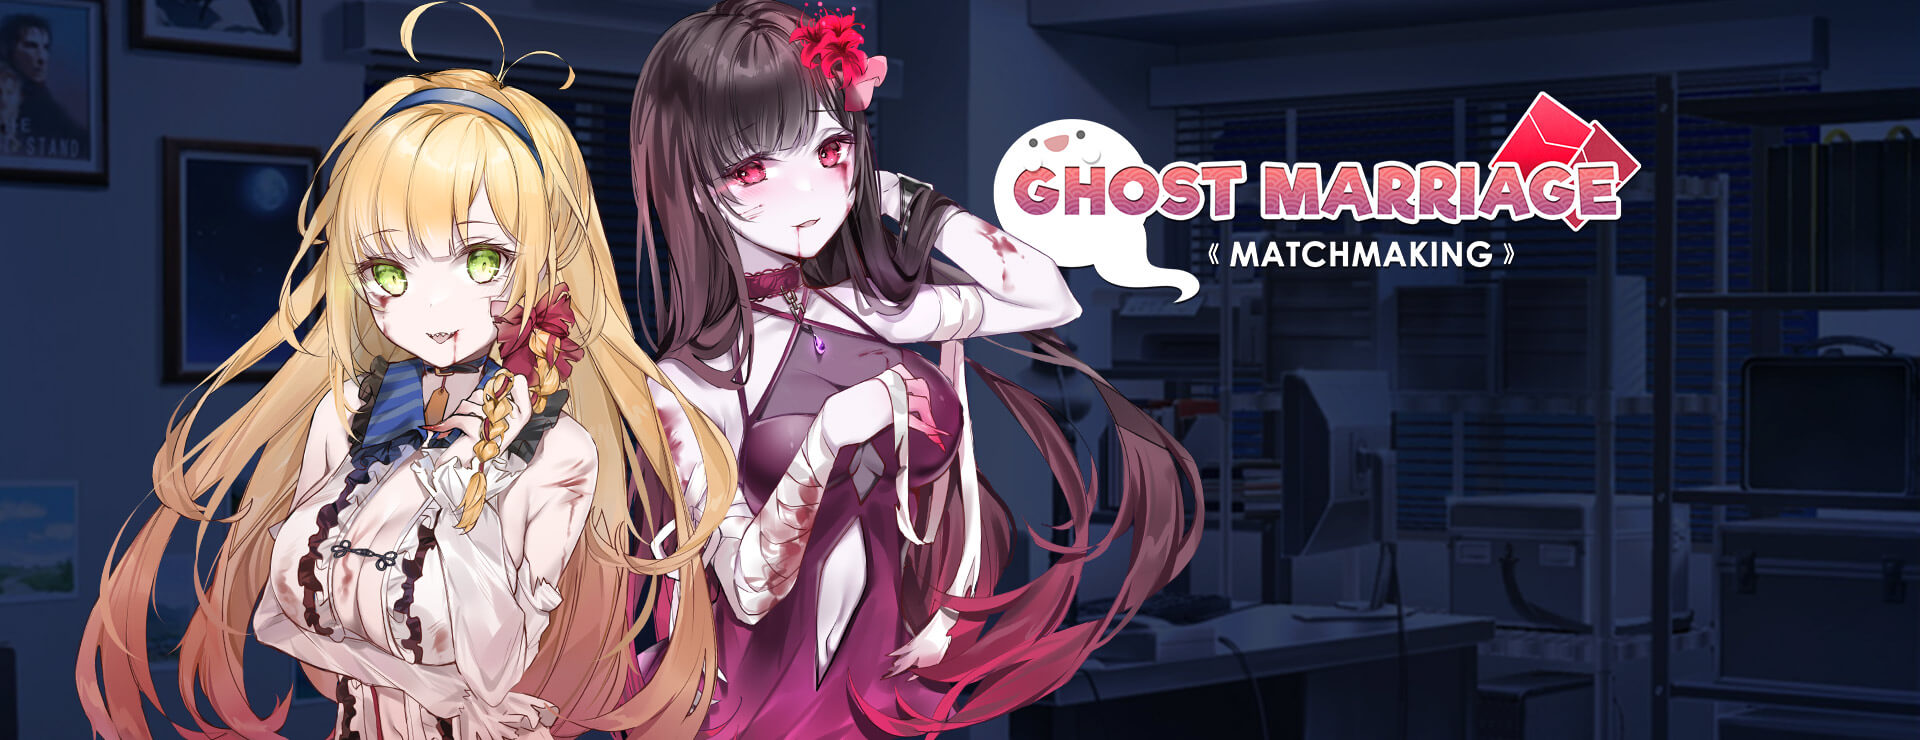 Ghost Marriage Matchmaking - RPG Spiel